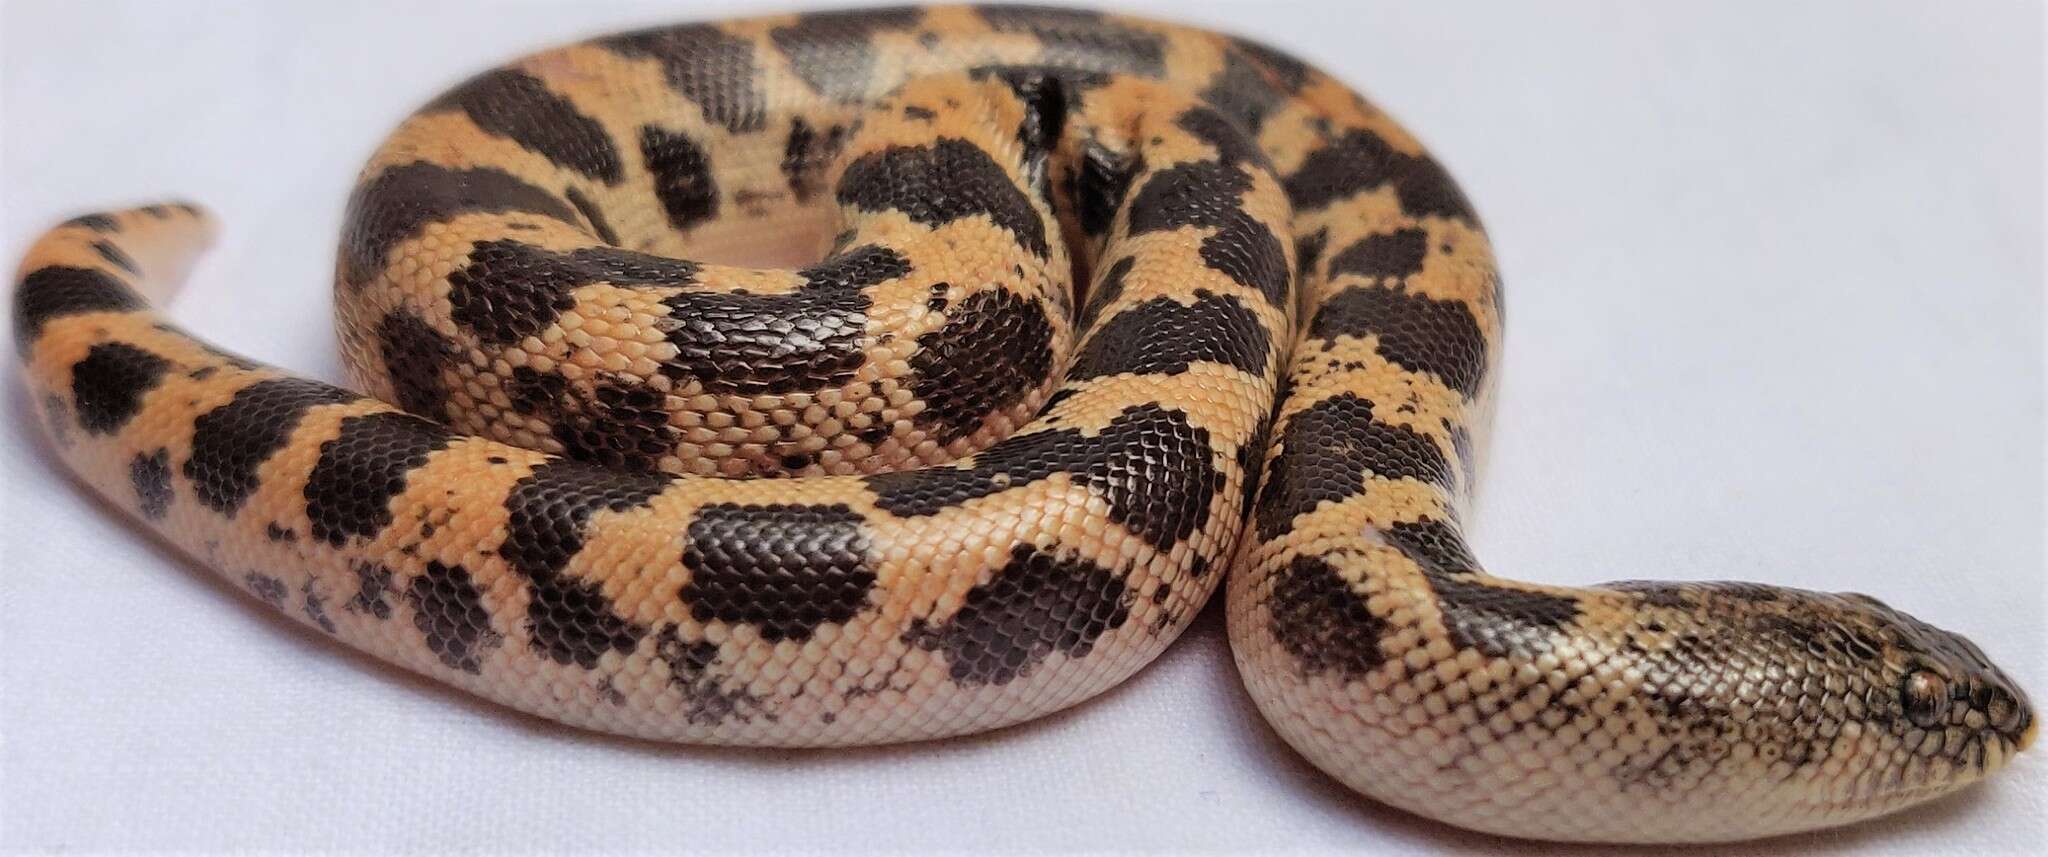 Image of Müller’s sand boa